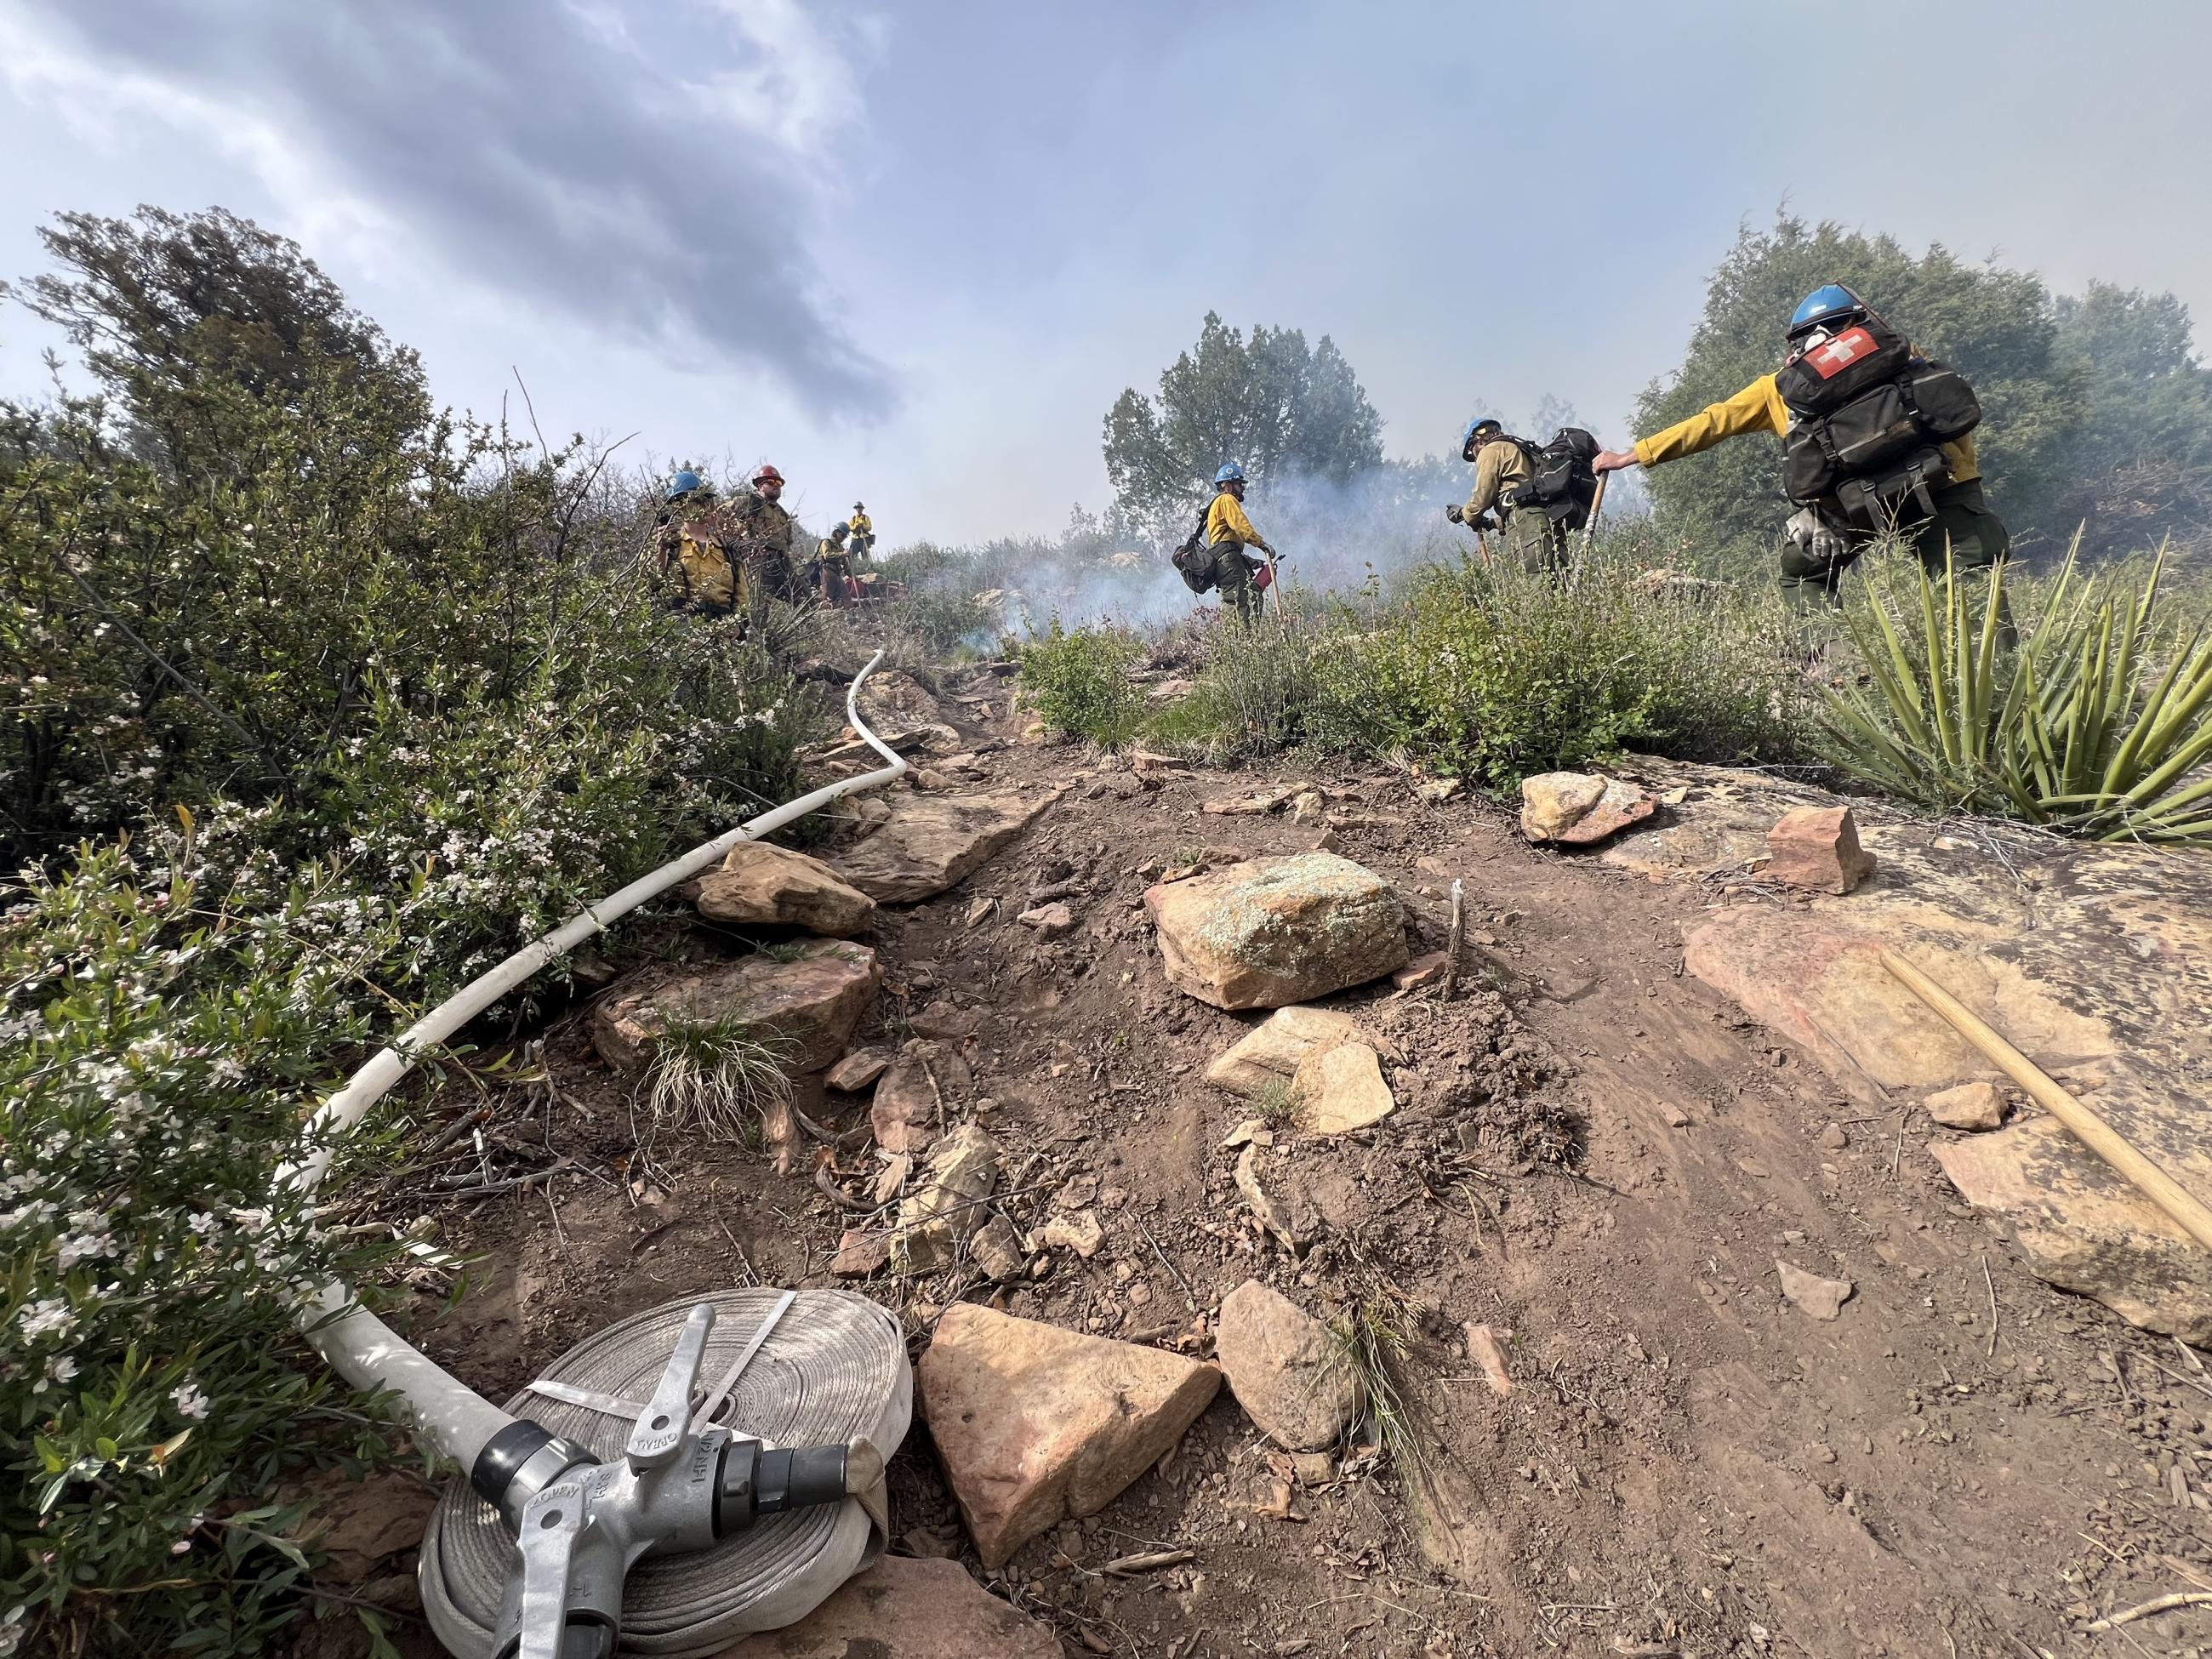 Firefighters are seen standing on a steep slope during a prescribed burn with a fire hose visible in the foreground.